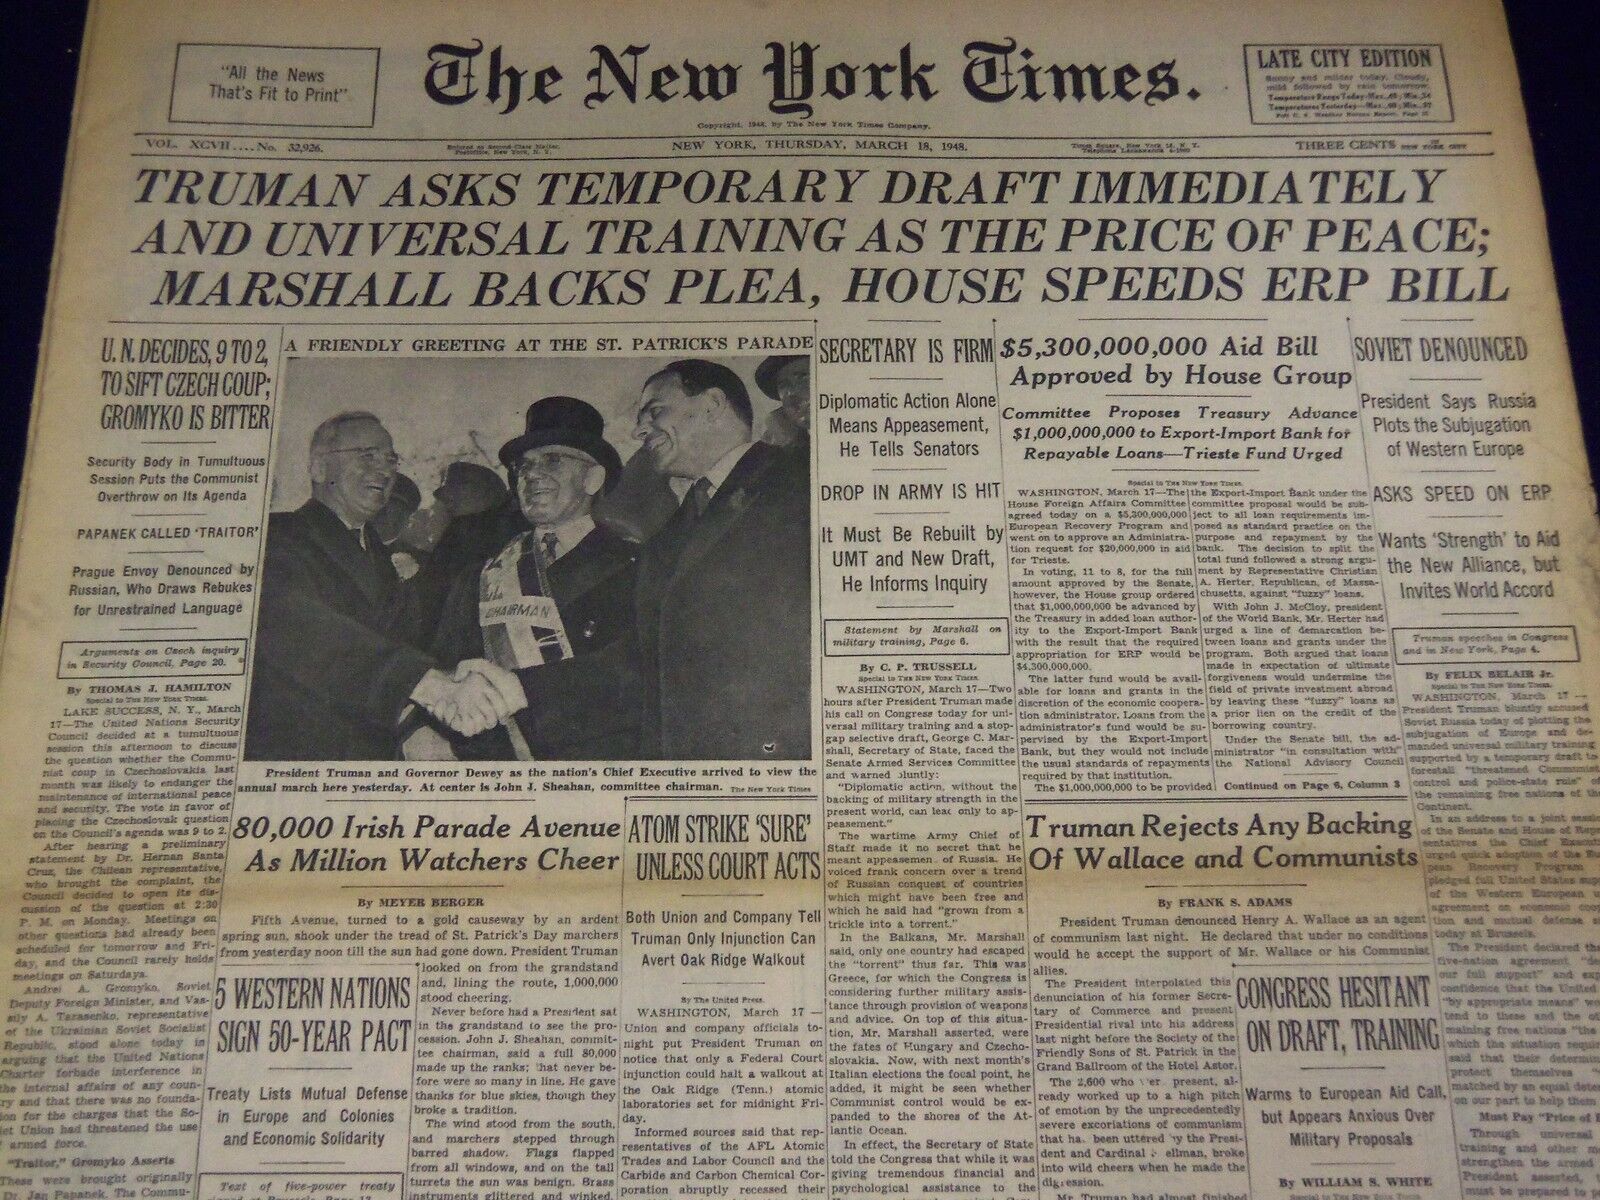 1948 MARCH 18 NEW YORK TIMES - TRUMAN ASKS TEMPORARY DRAFT - NT 3382